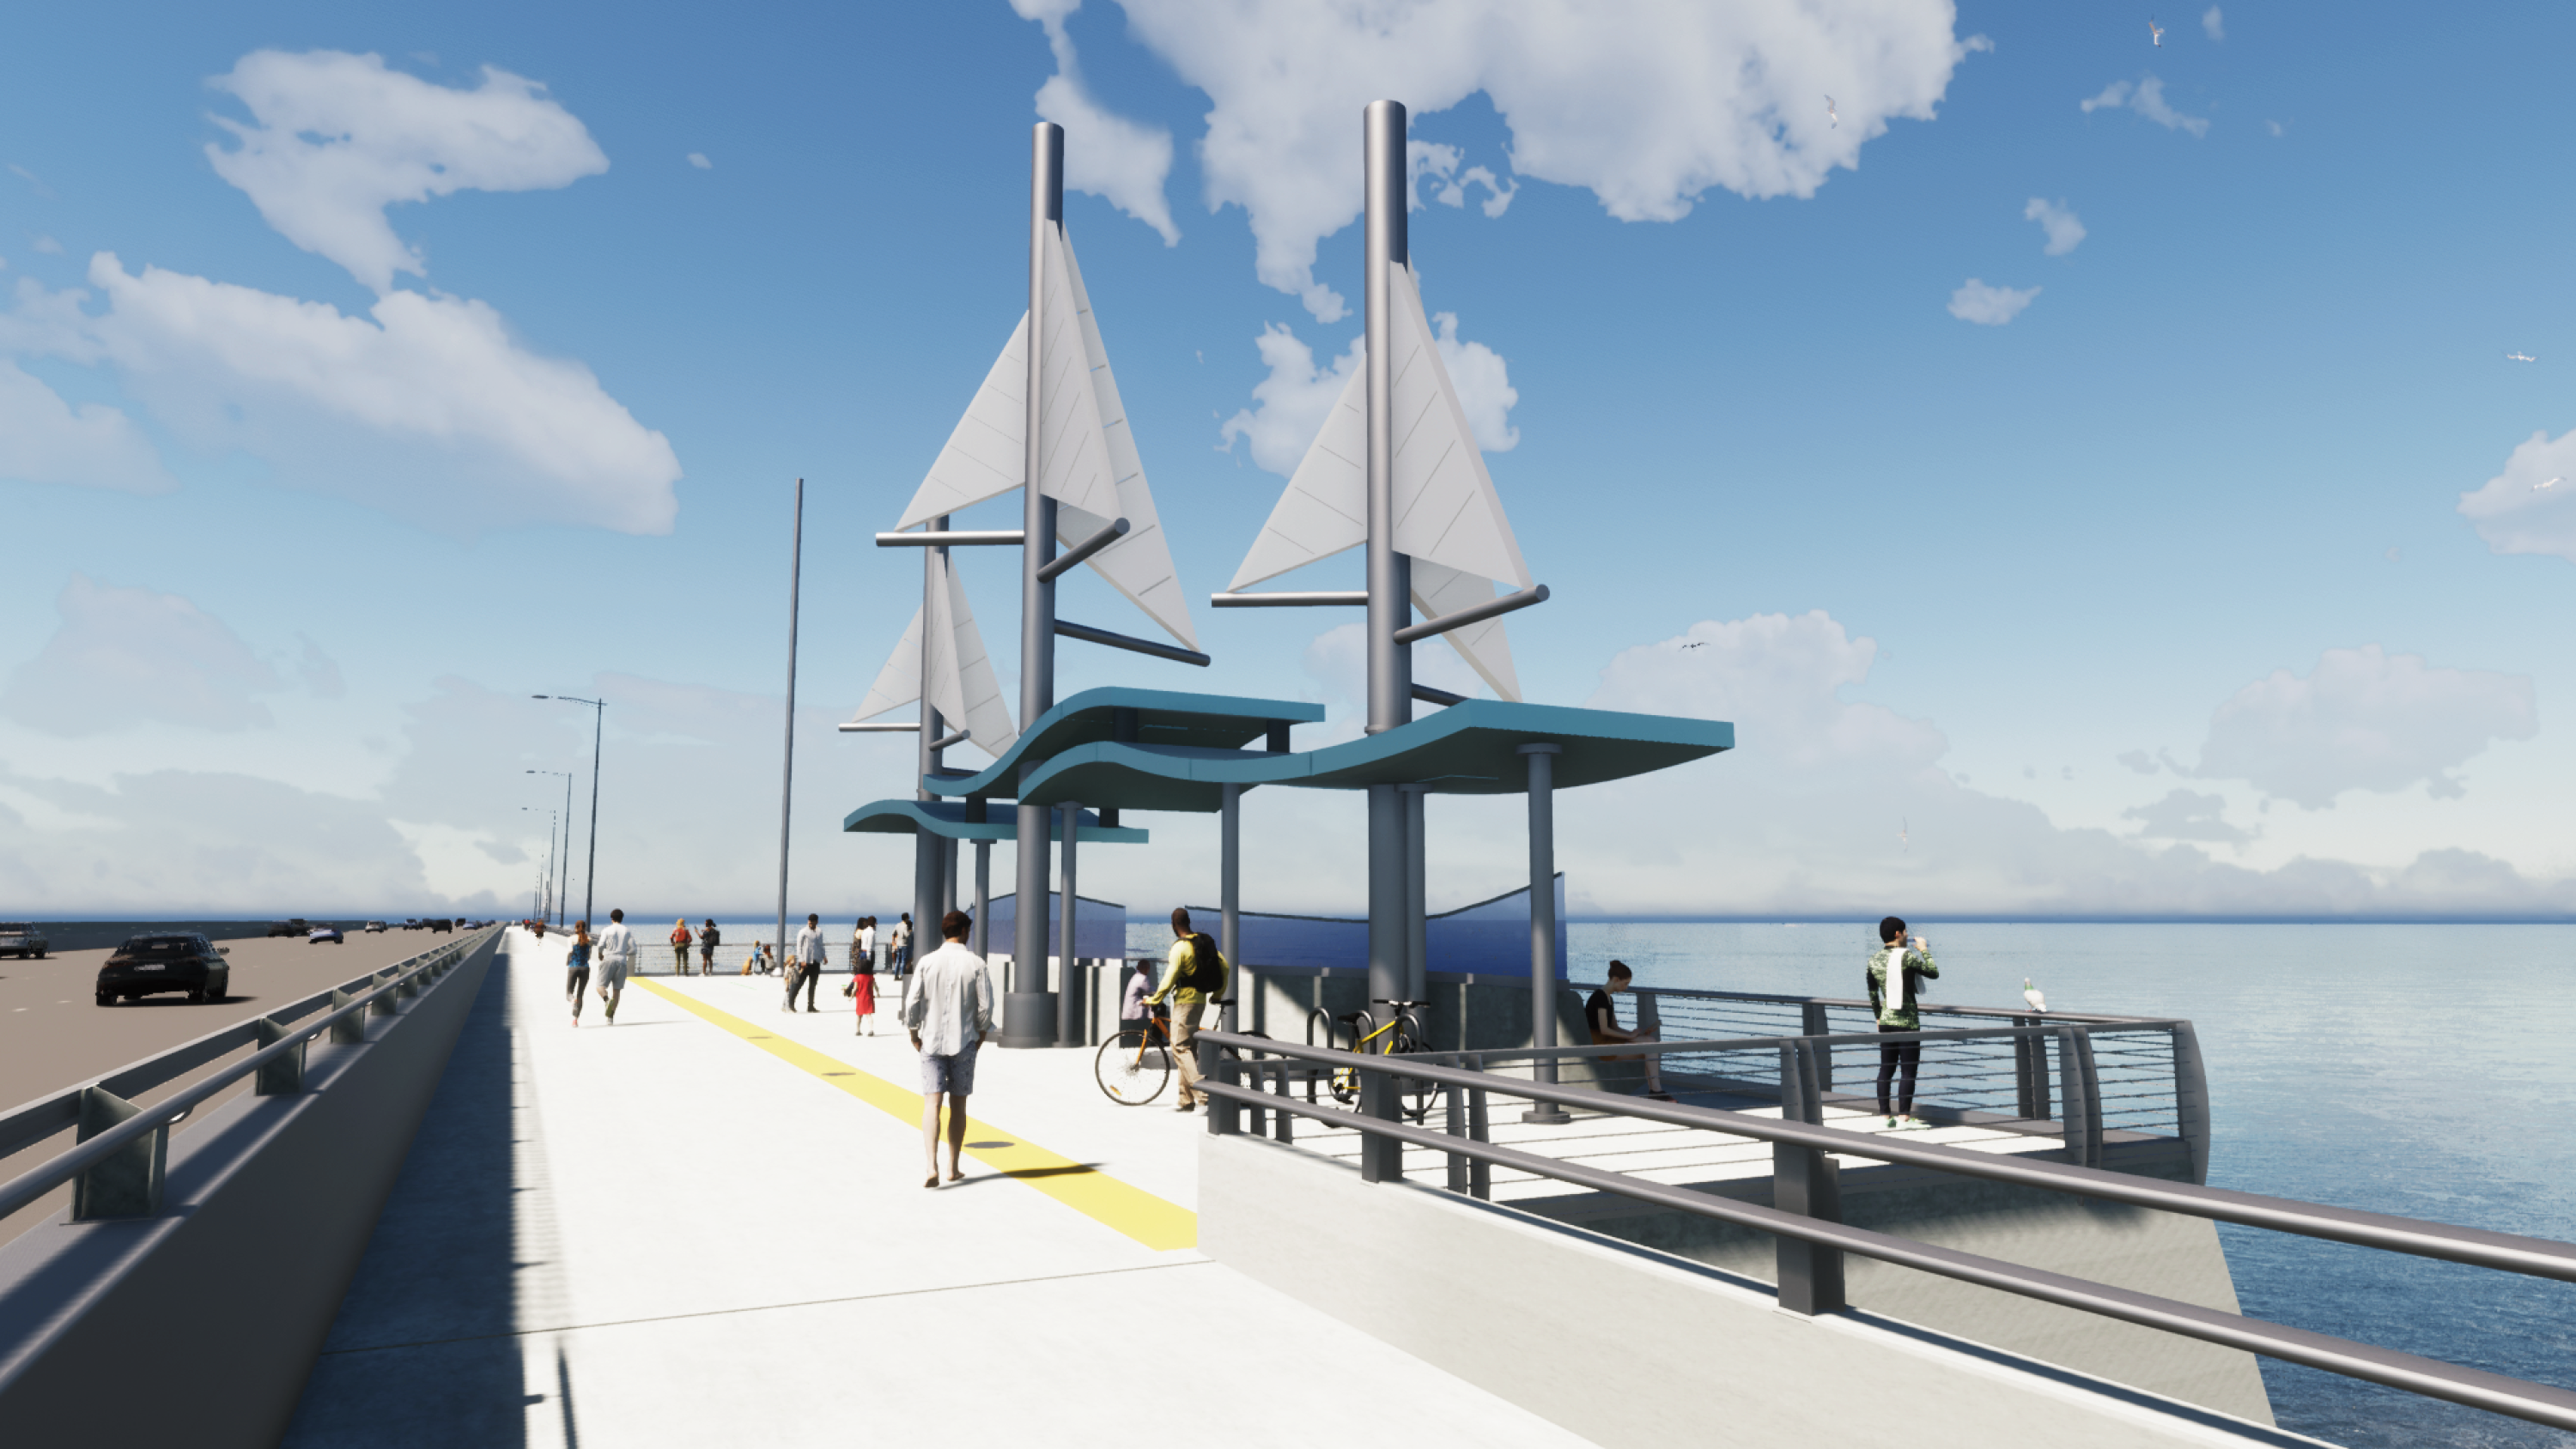 A rendering showing a pedestrian and bike path attached to a bridge overlooking the water. The path has decorate white features that look like sails.